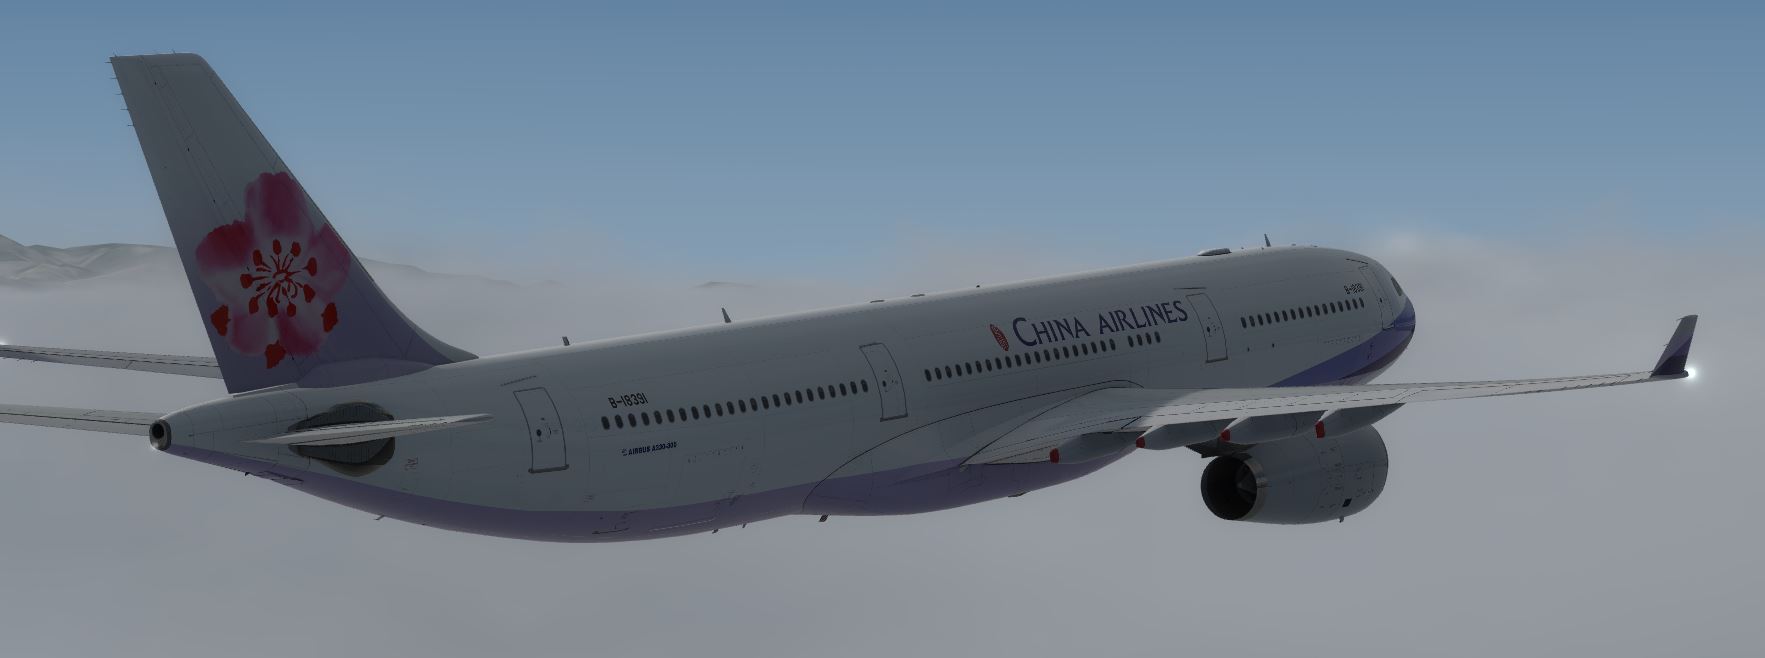 AS A330 ChinaAirline-4295 